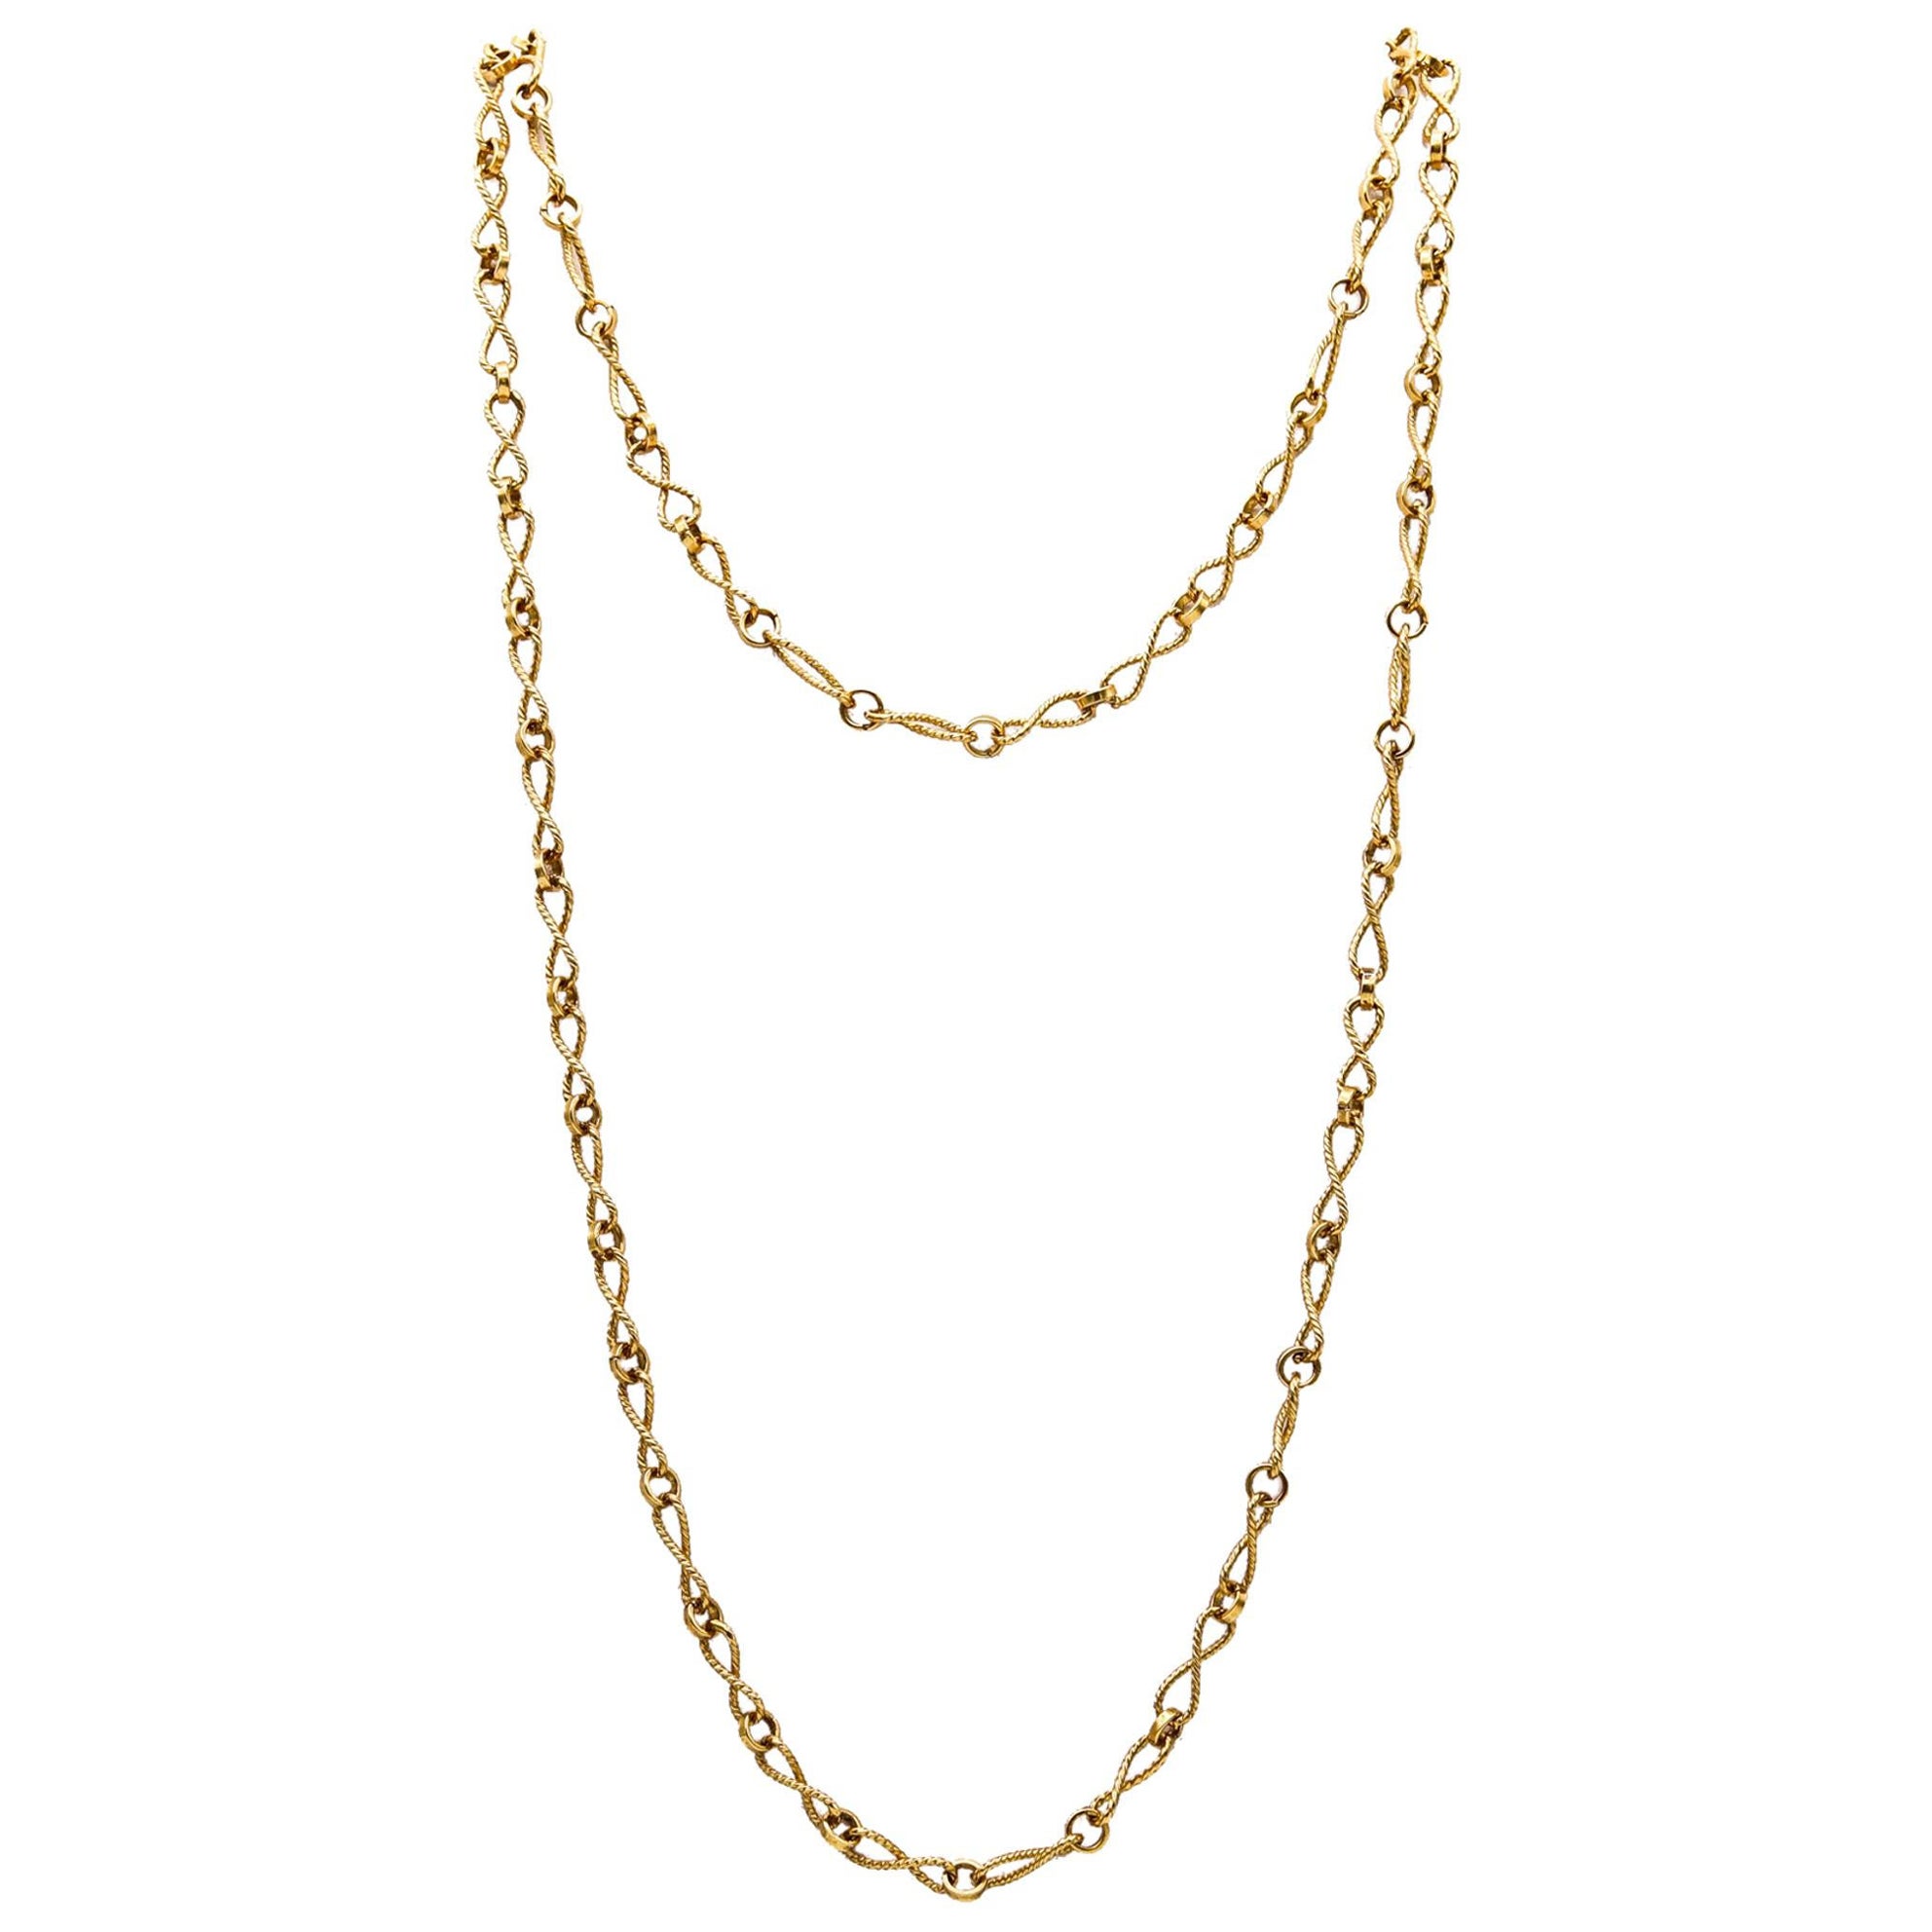 Alessi Domenico 1970 Retro Modern Twisted Long Chain In Solid 18Kt Yellow Gold